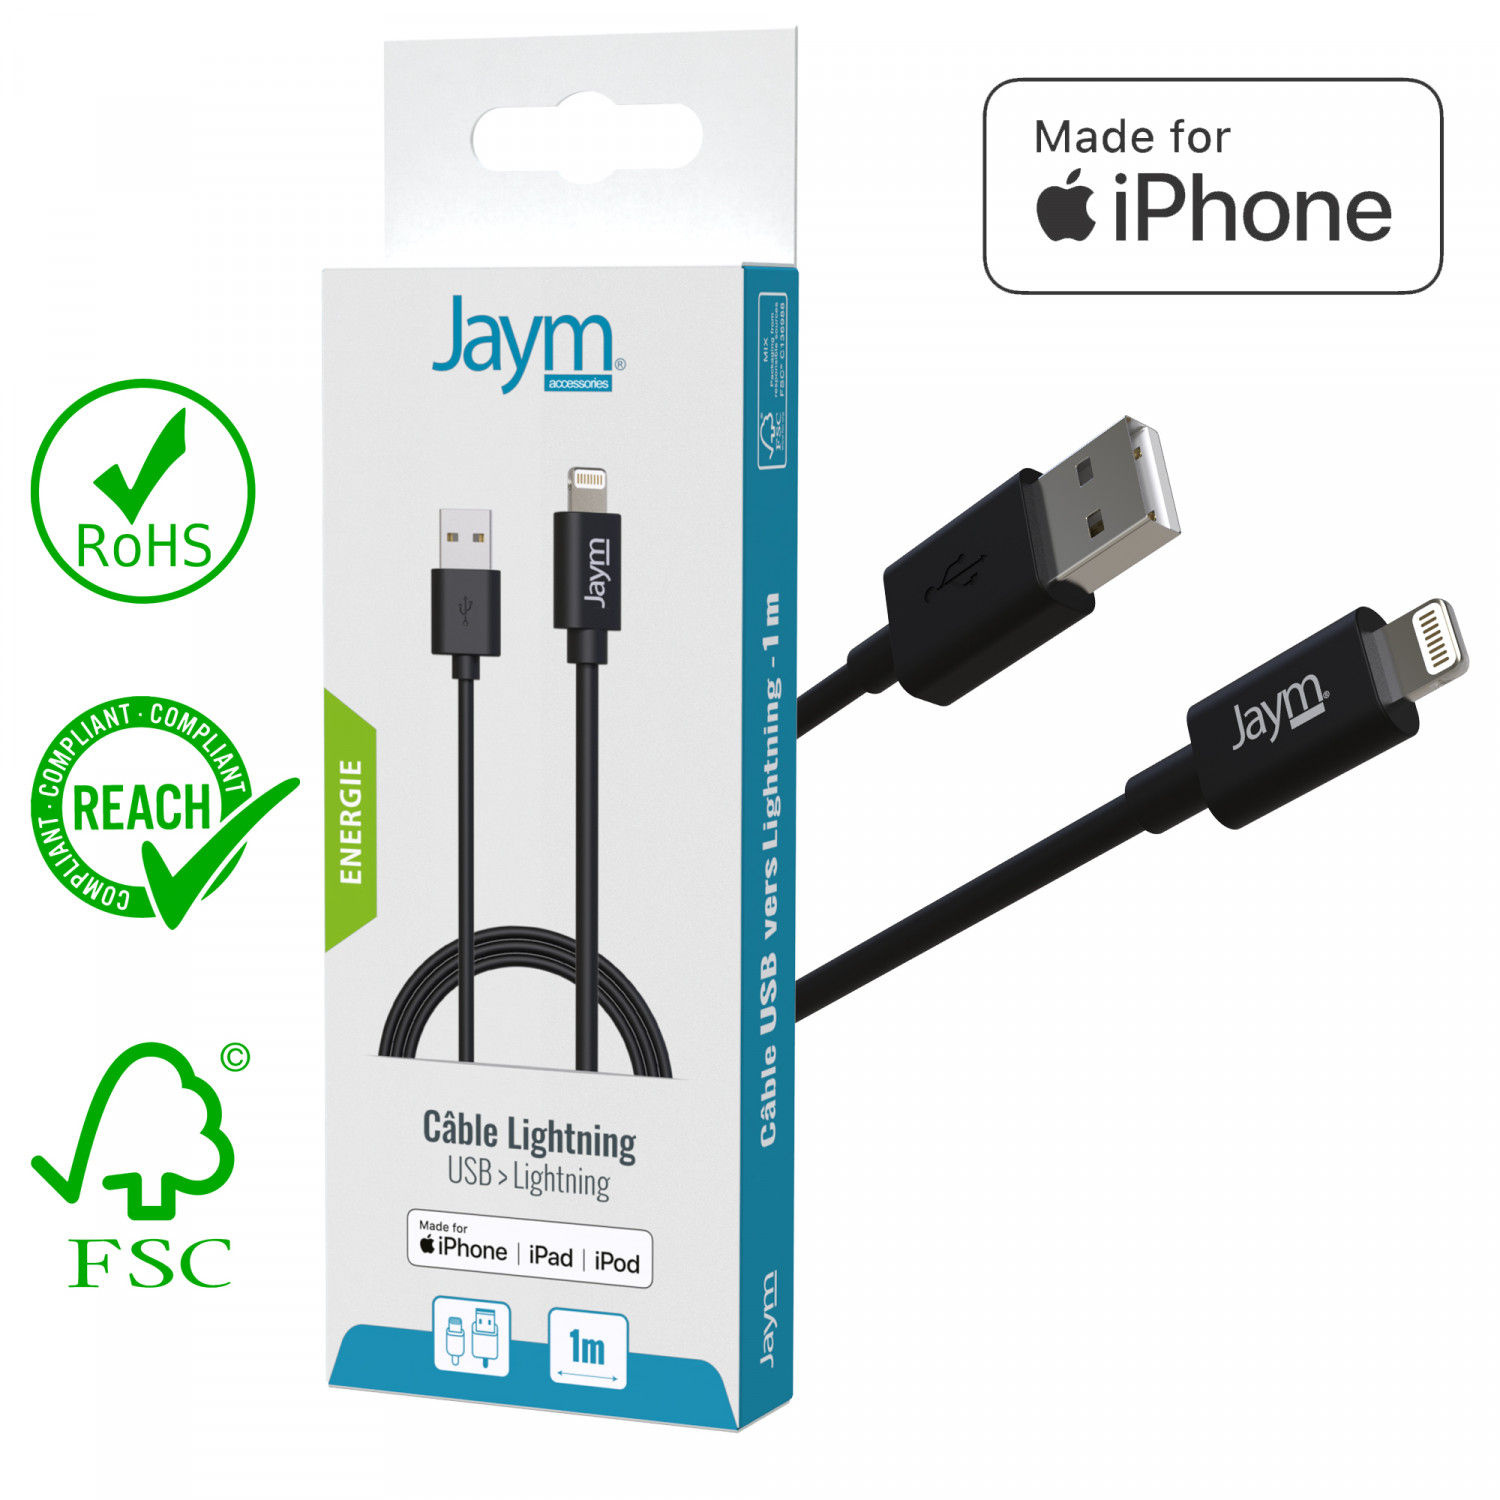 CABLE CHARGE ET SYNCHRONISATION IPHONE